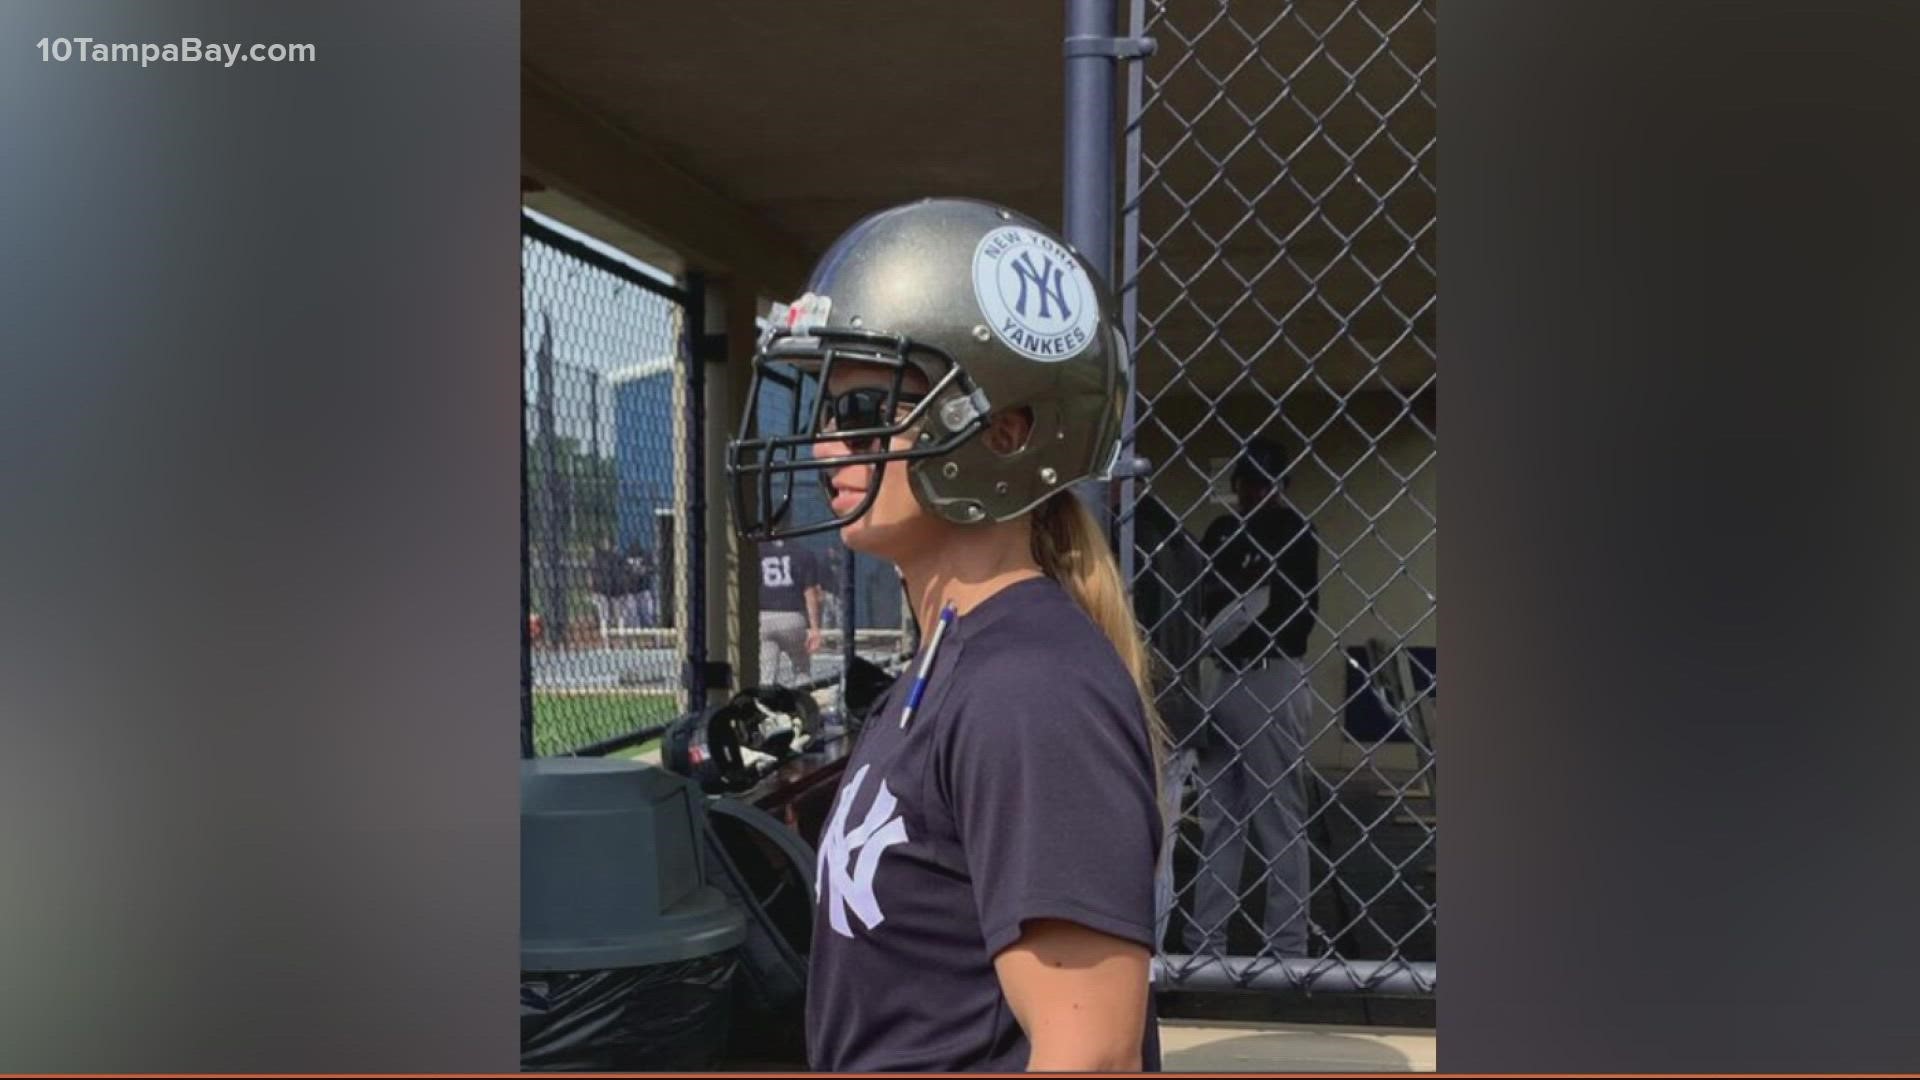 Yankees Minor League Manager Rachel Balkovec Hit in Face by